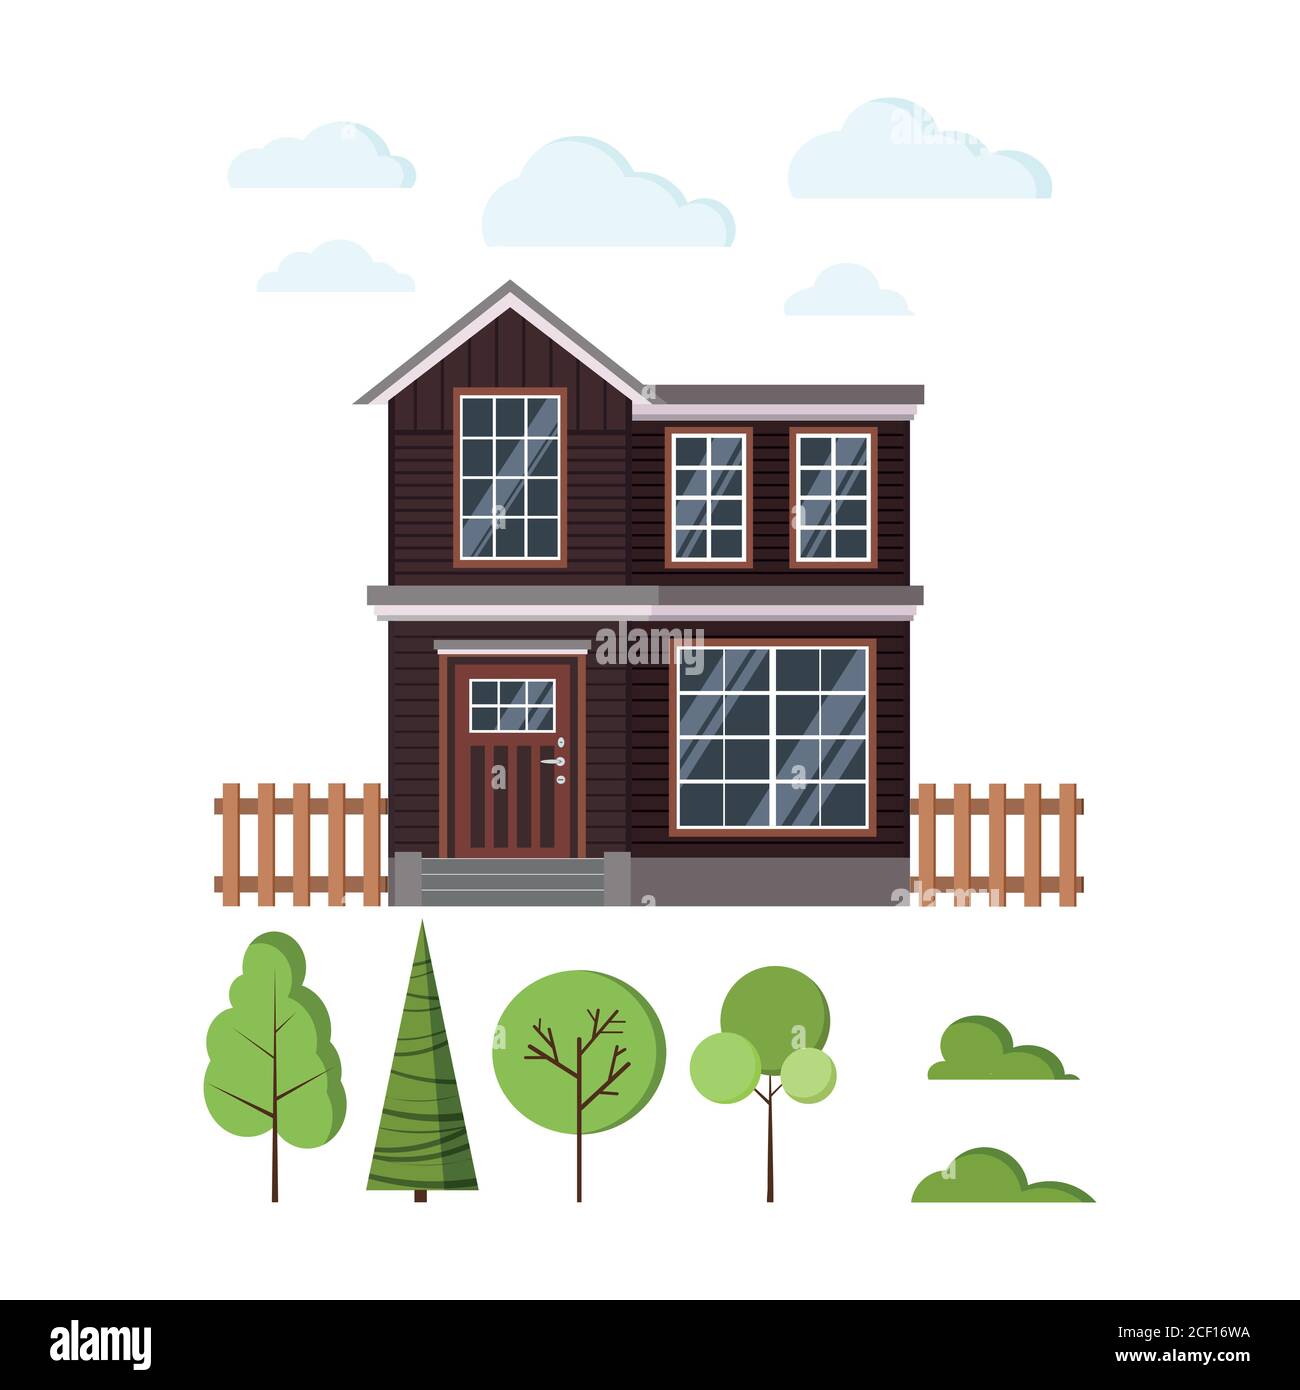 Rural wooden house exterior with fences, clouds and different trees icon set isolated on white background. Stock Vector